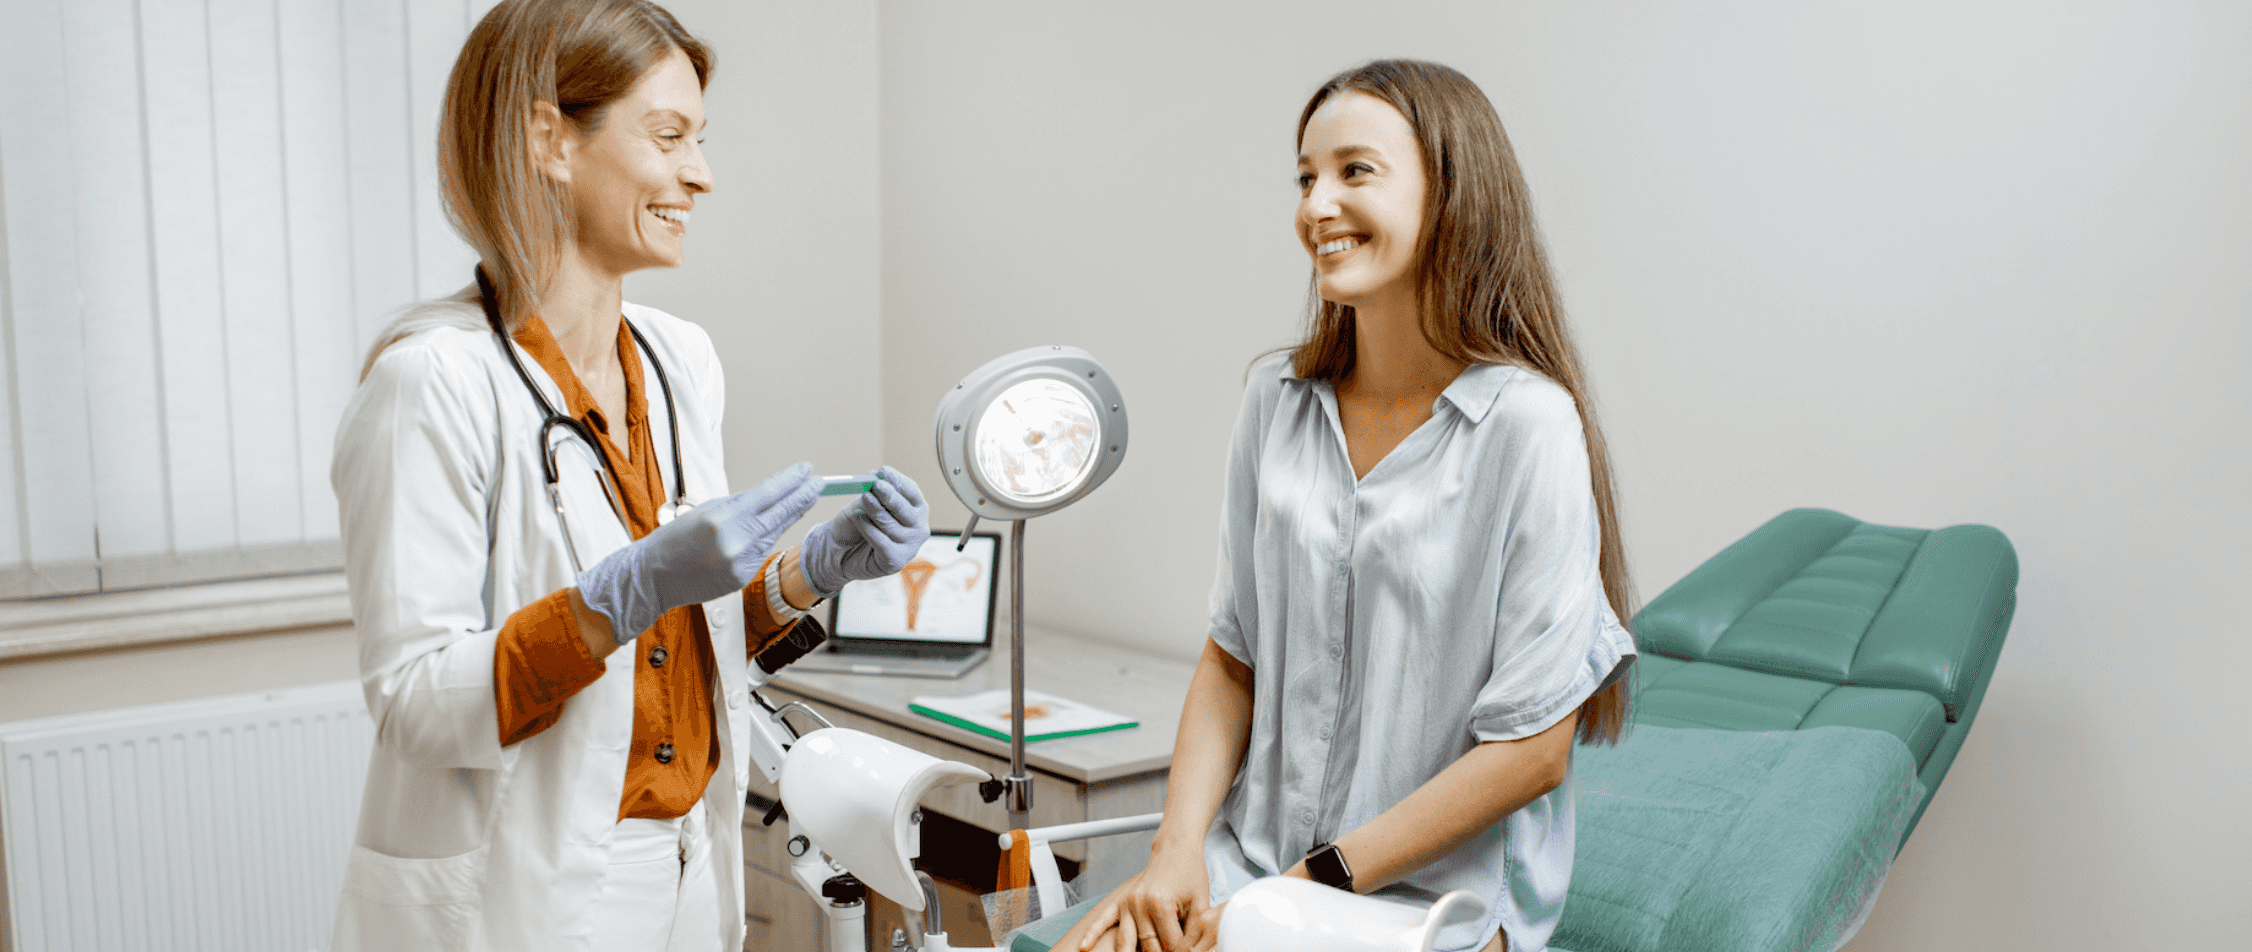 Female Gynecologist Smiling At Her Patient